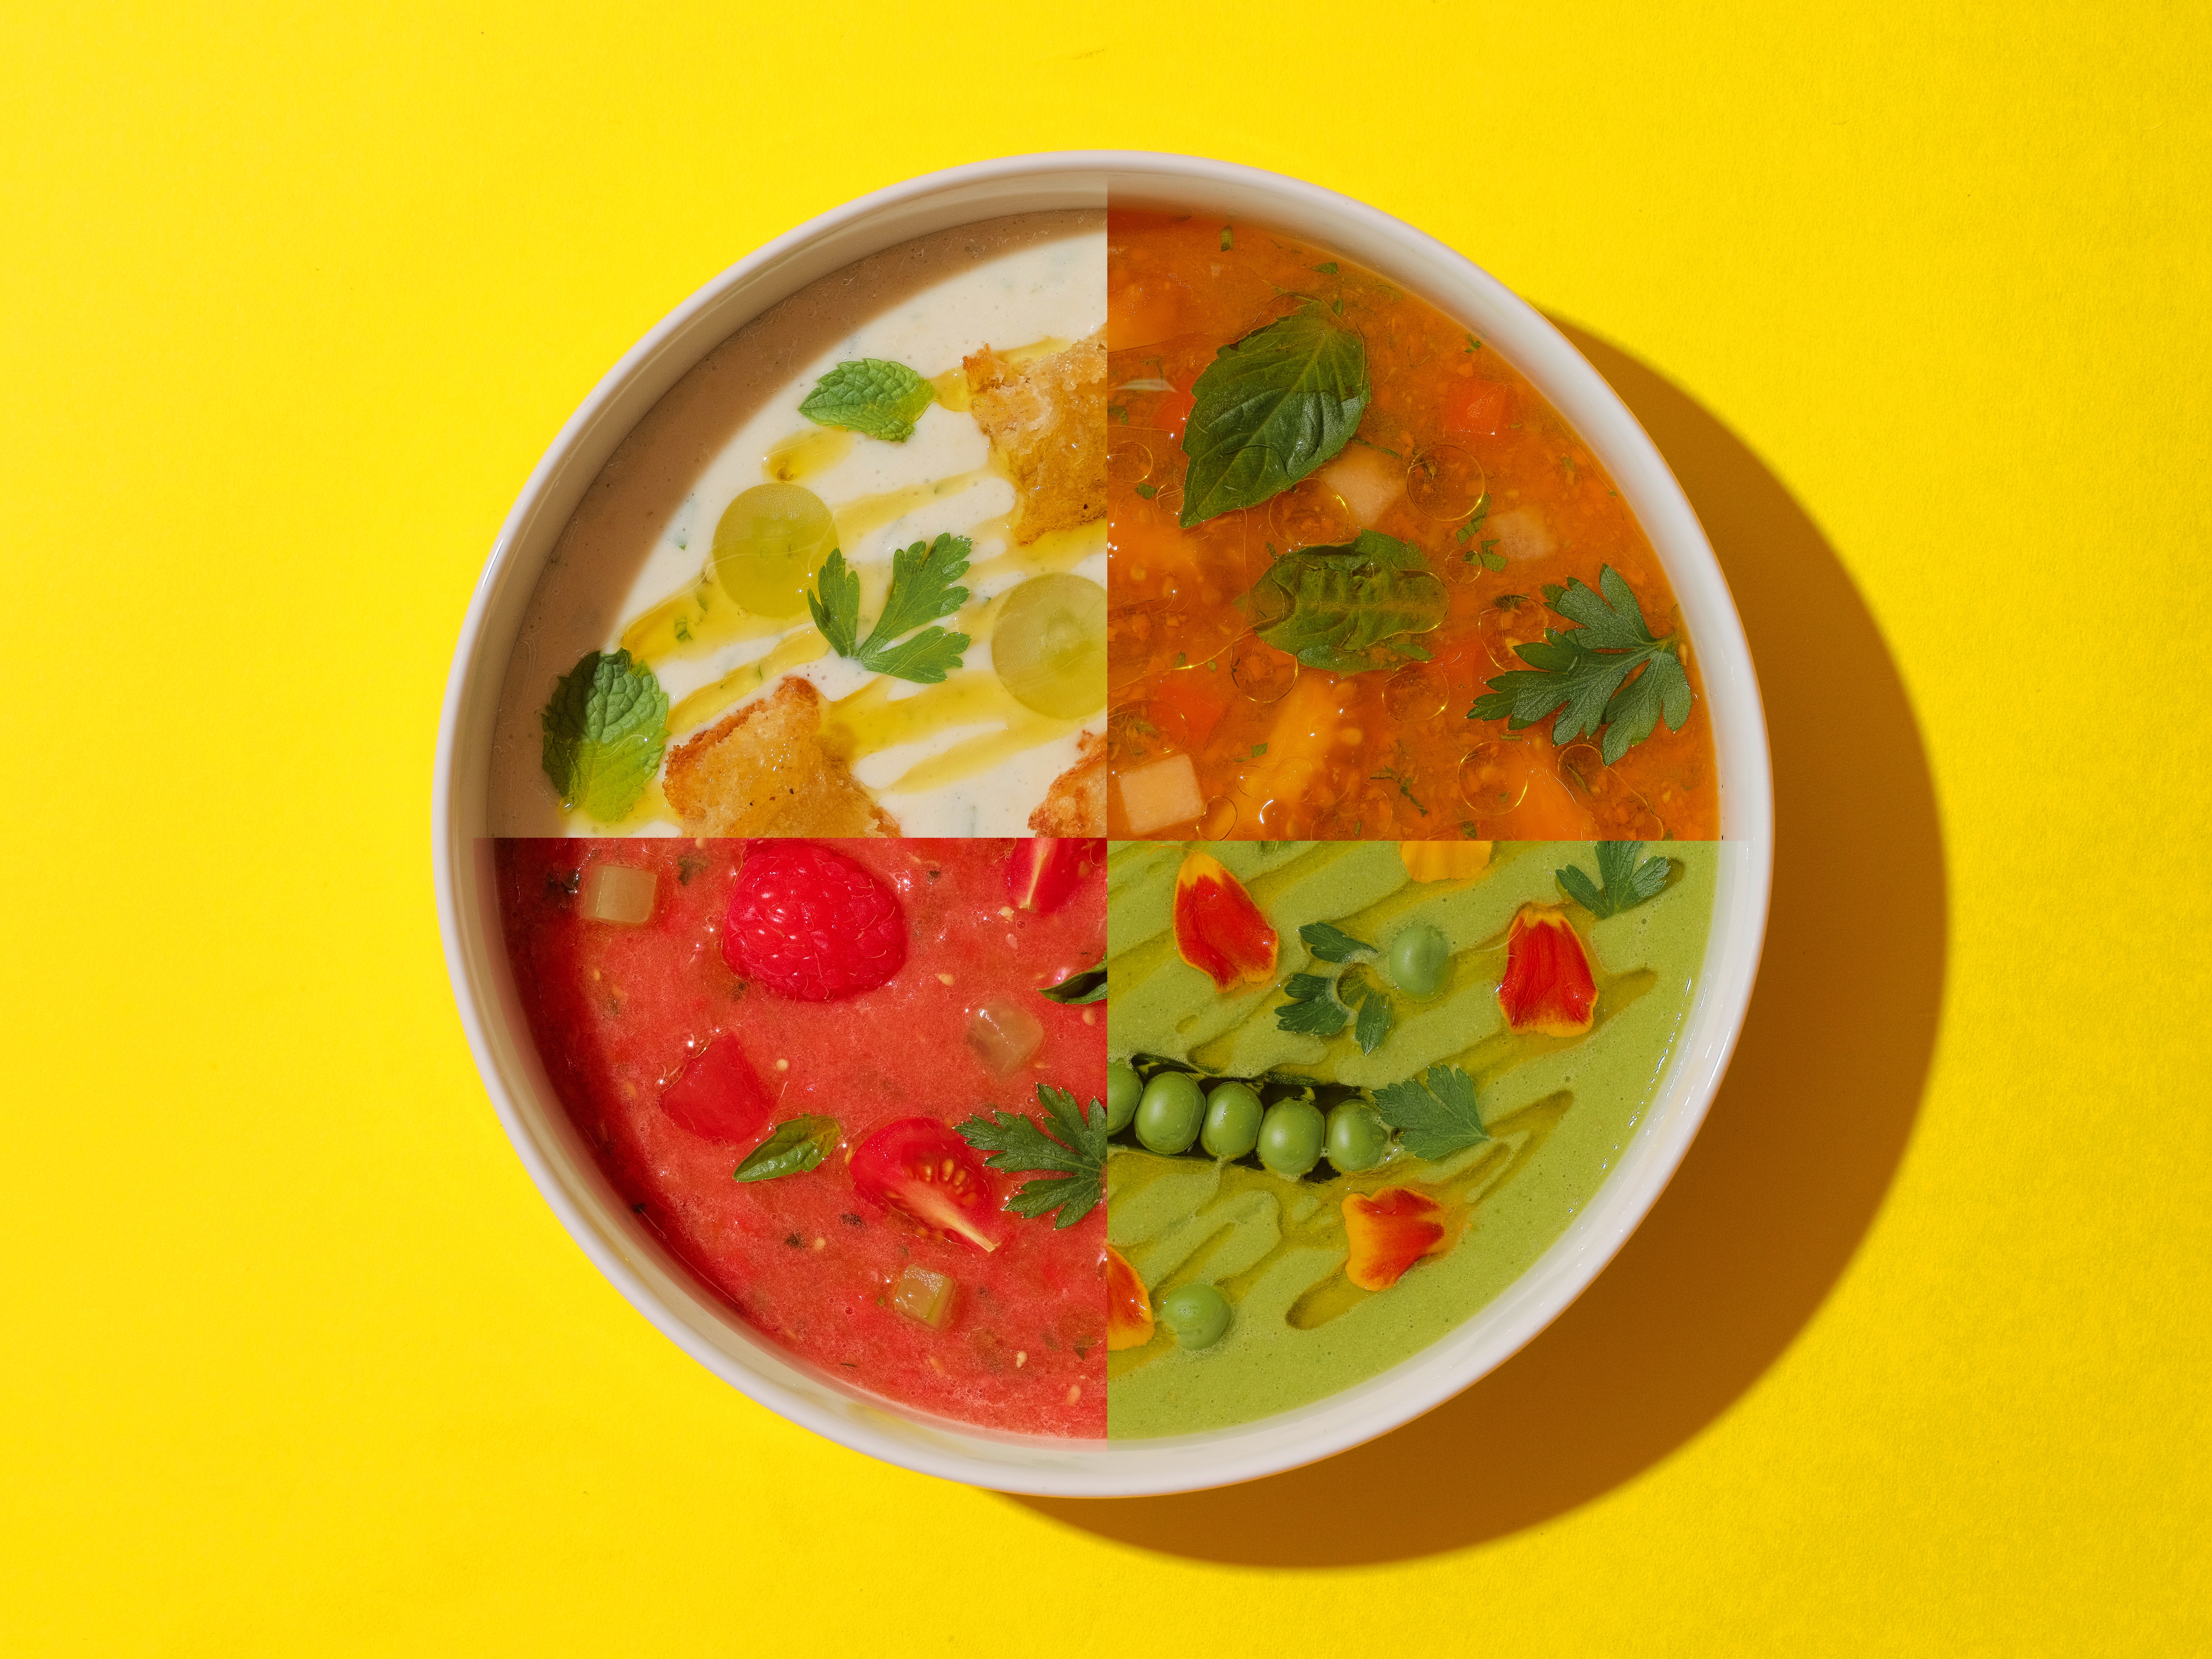 Souped Up: How to Gazpacho Your Way